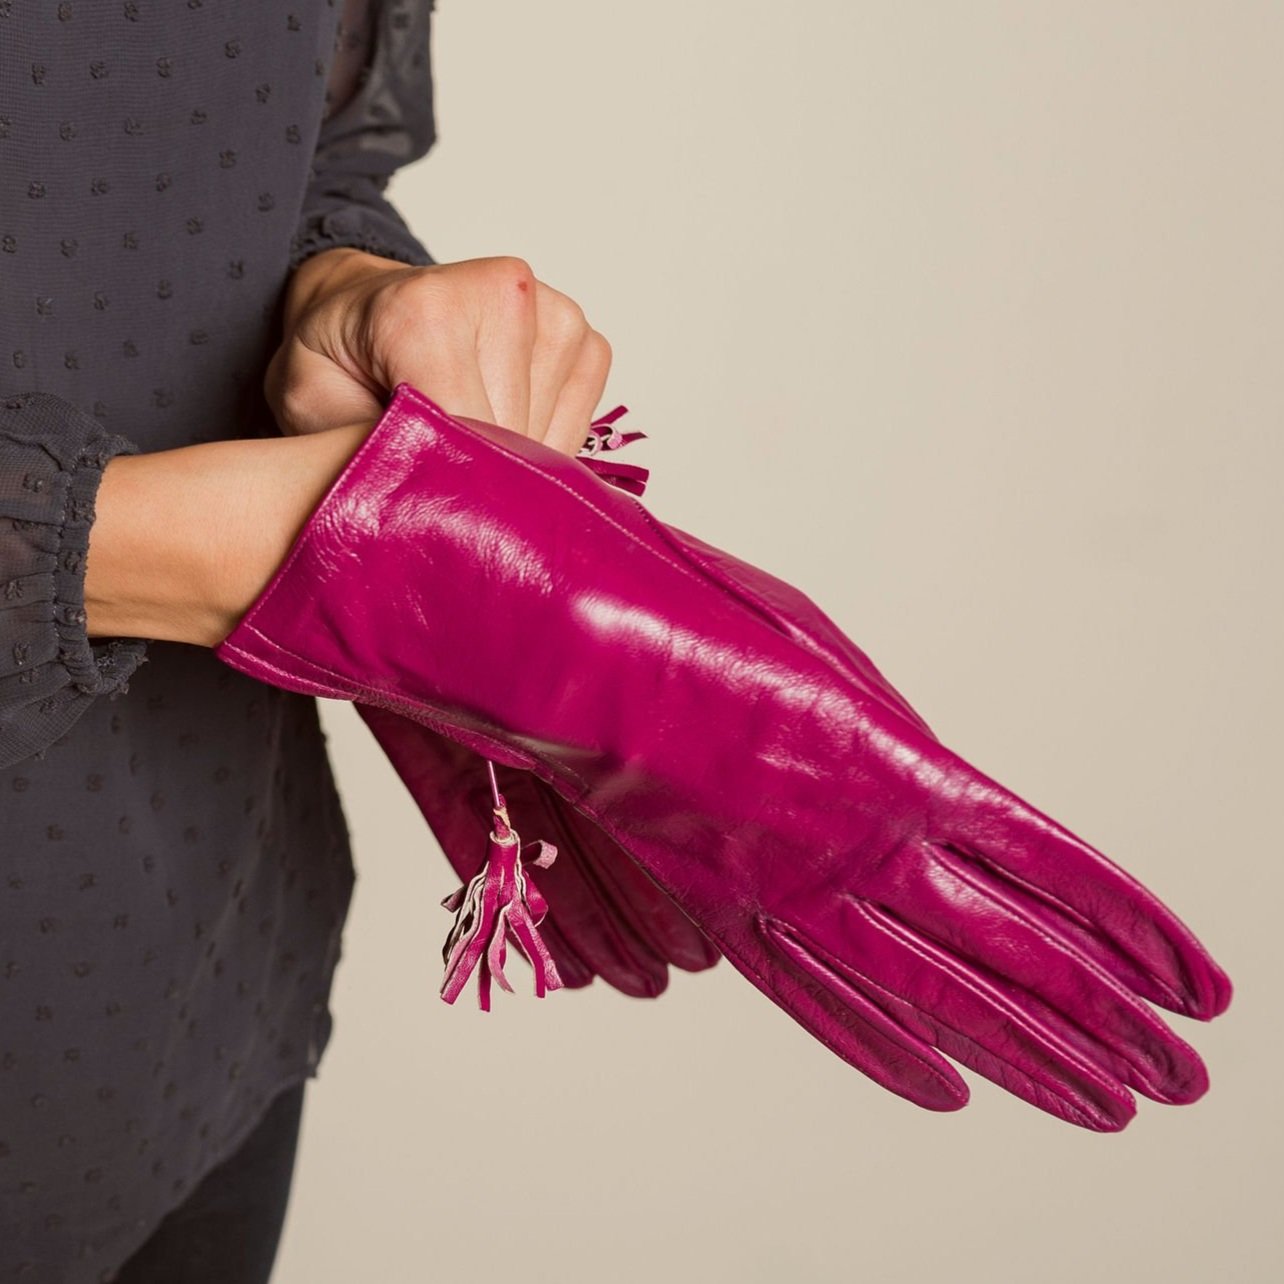 Pink leather gloves.